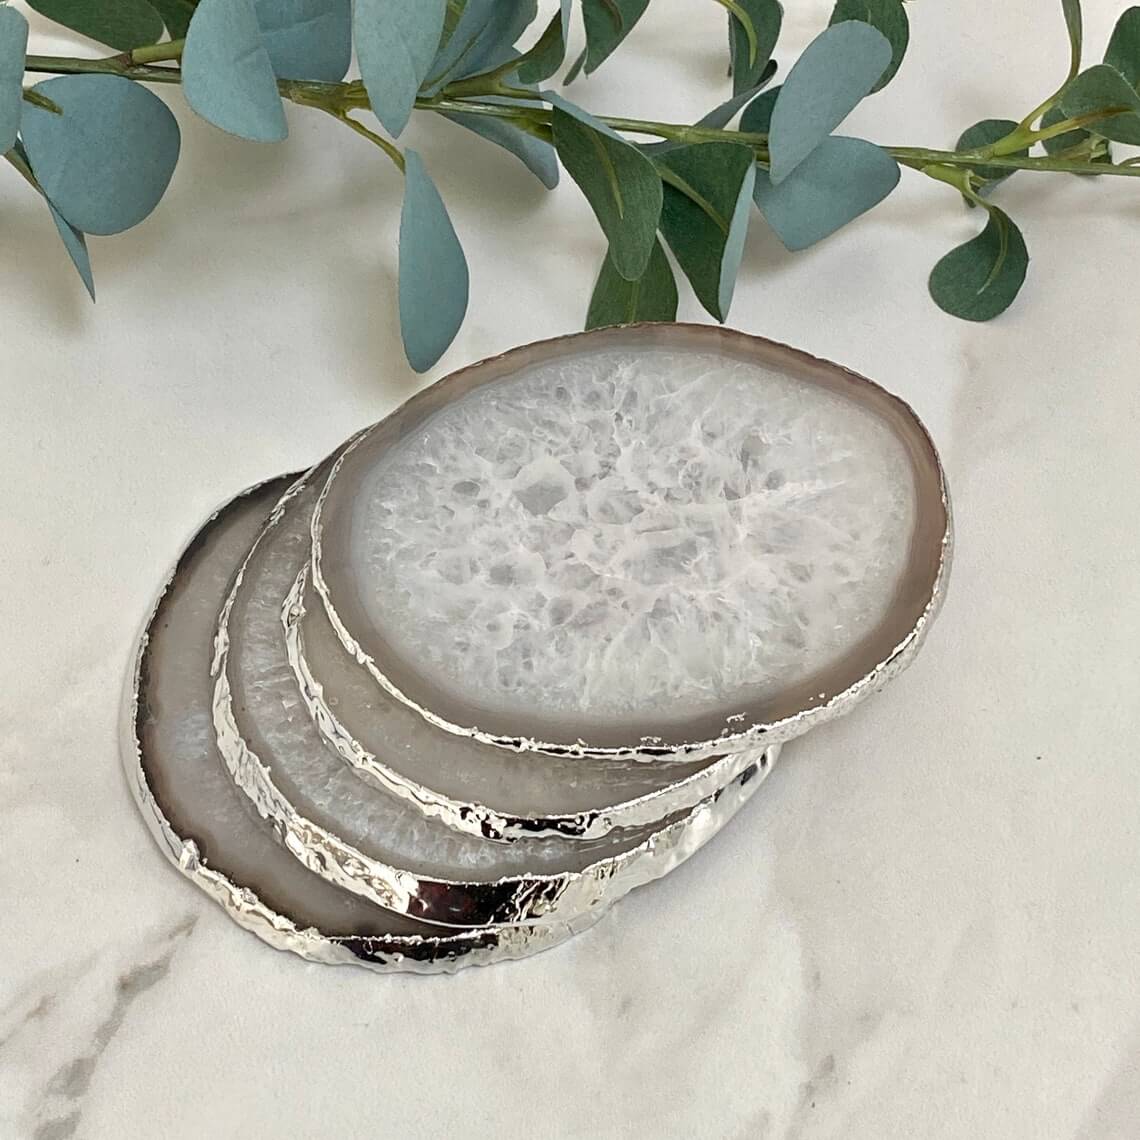 Brazilian White Agate Coasters Kissed by Silver